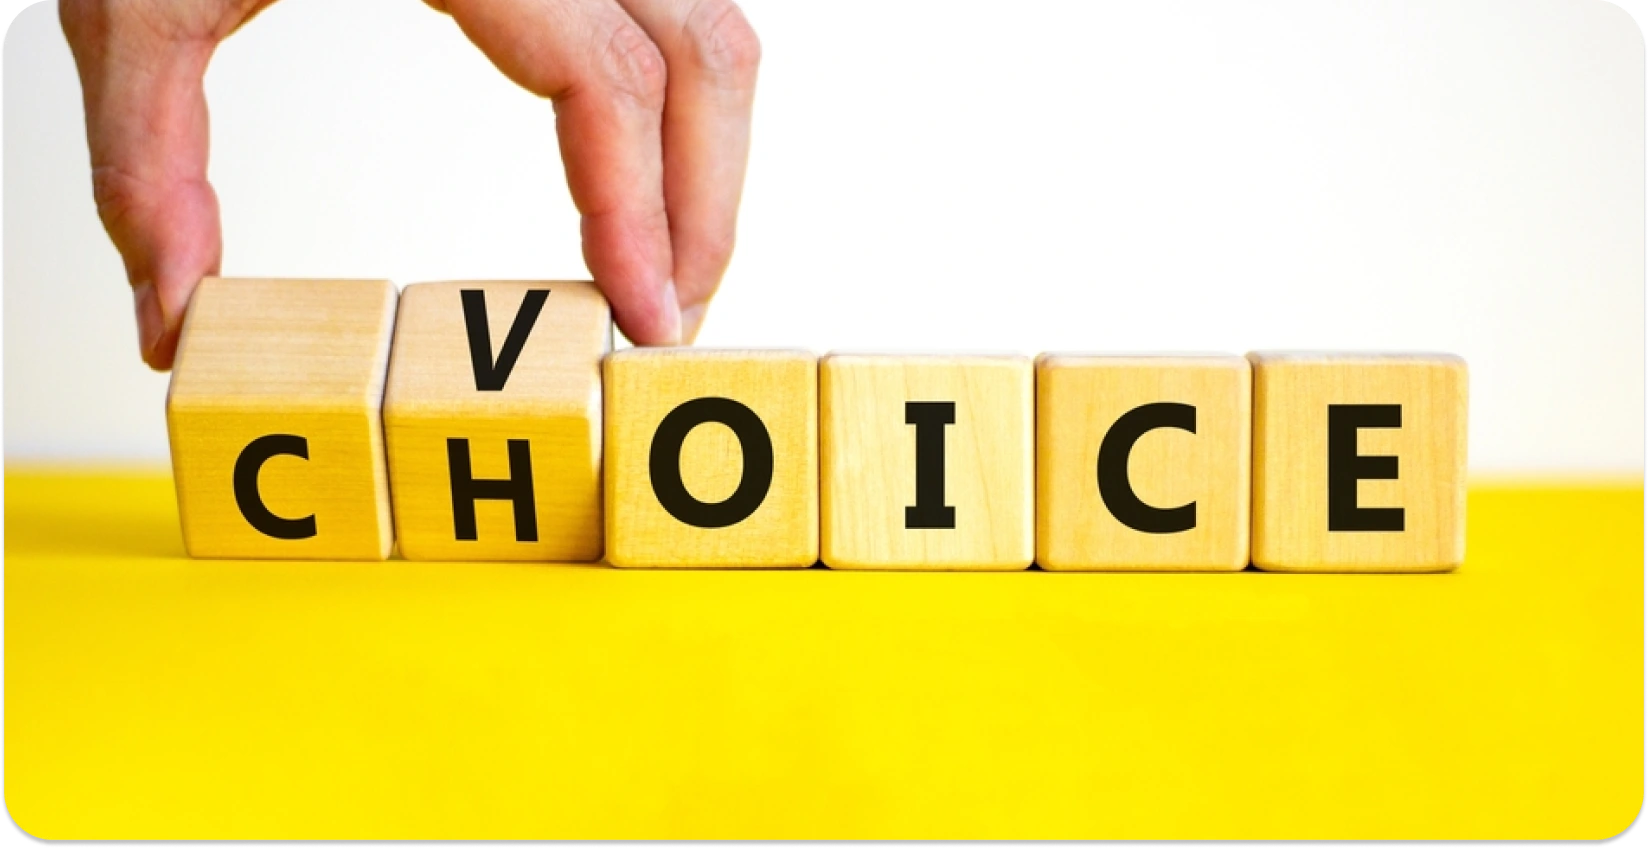 Hand adjusting wooden blocks to spell the word "CHOICE" on a yellow background.